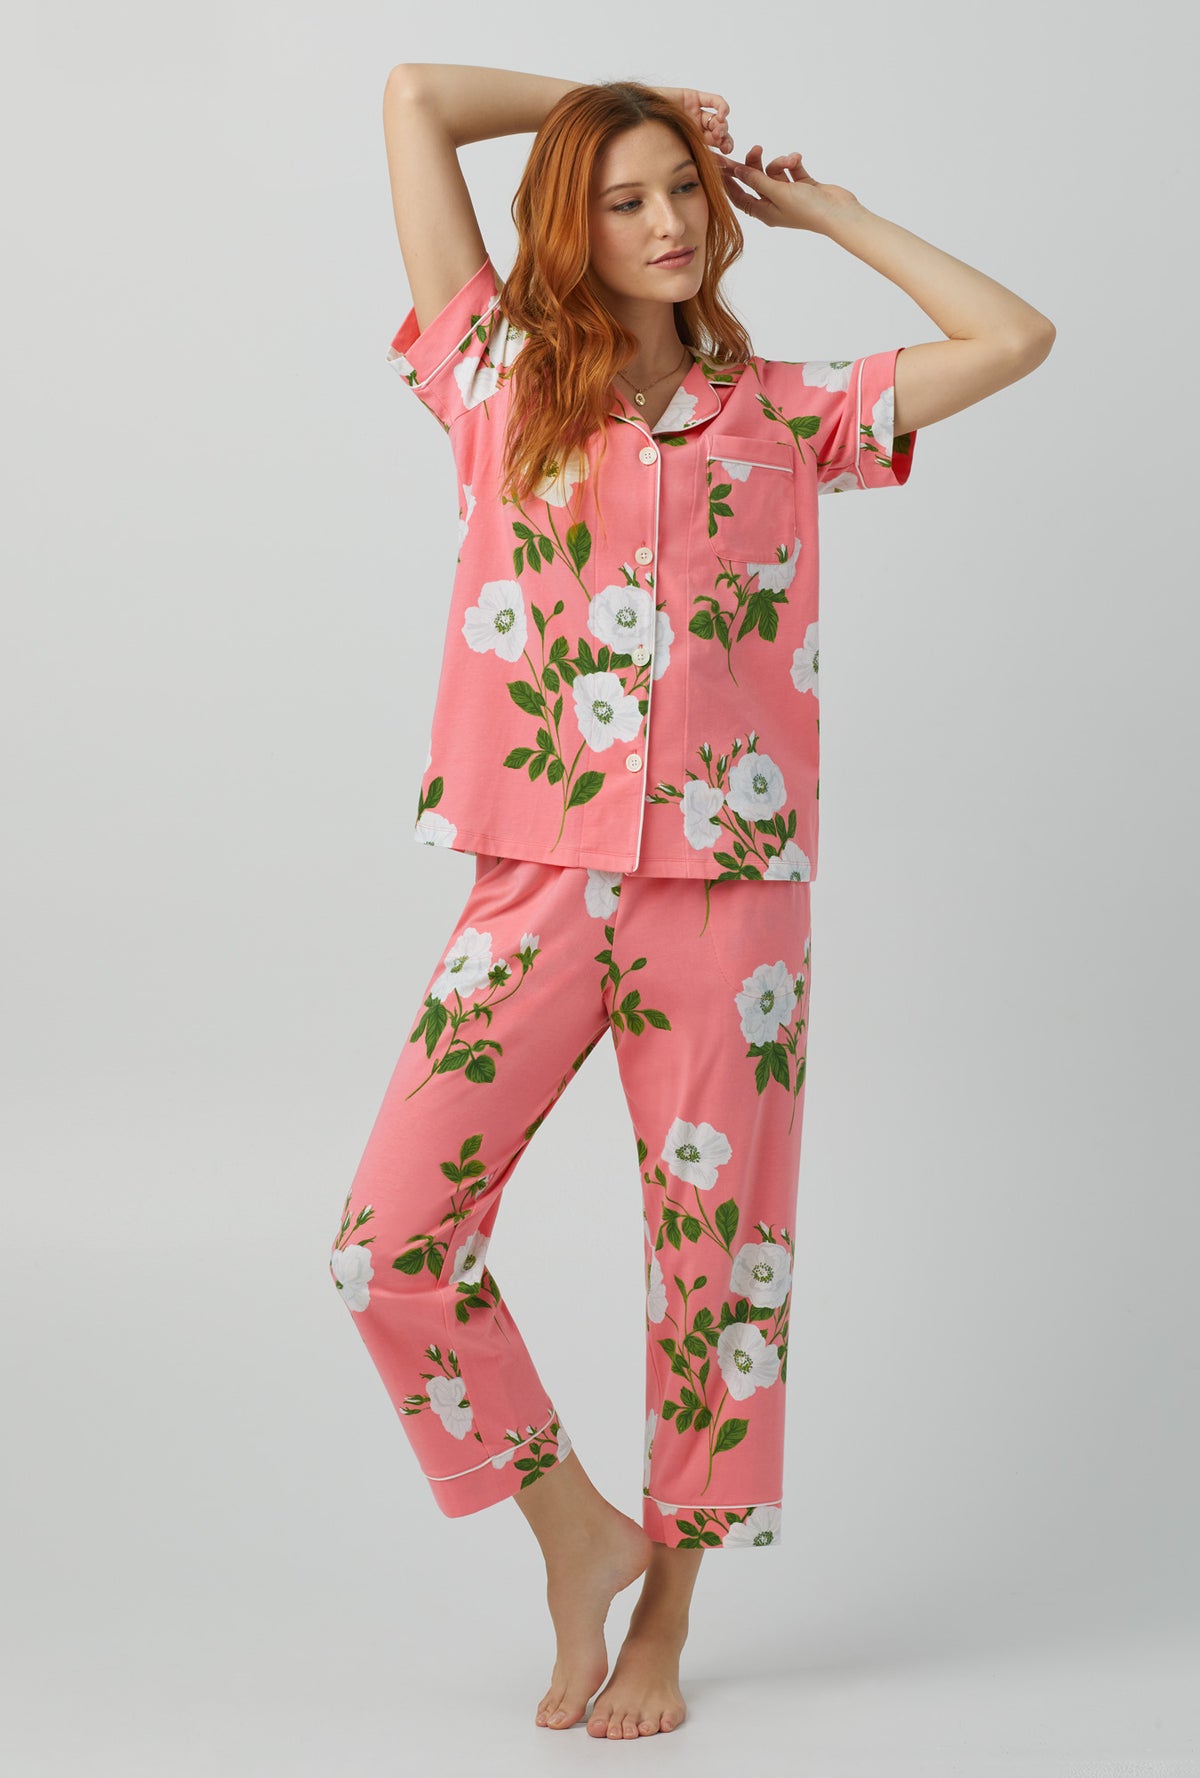 A lady wearing red Short Sleeve Classic Stretch Jersey Cropped PJ Set with White Poppy print